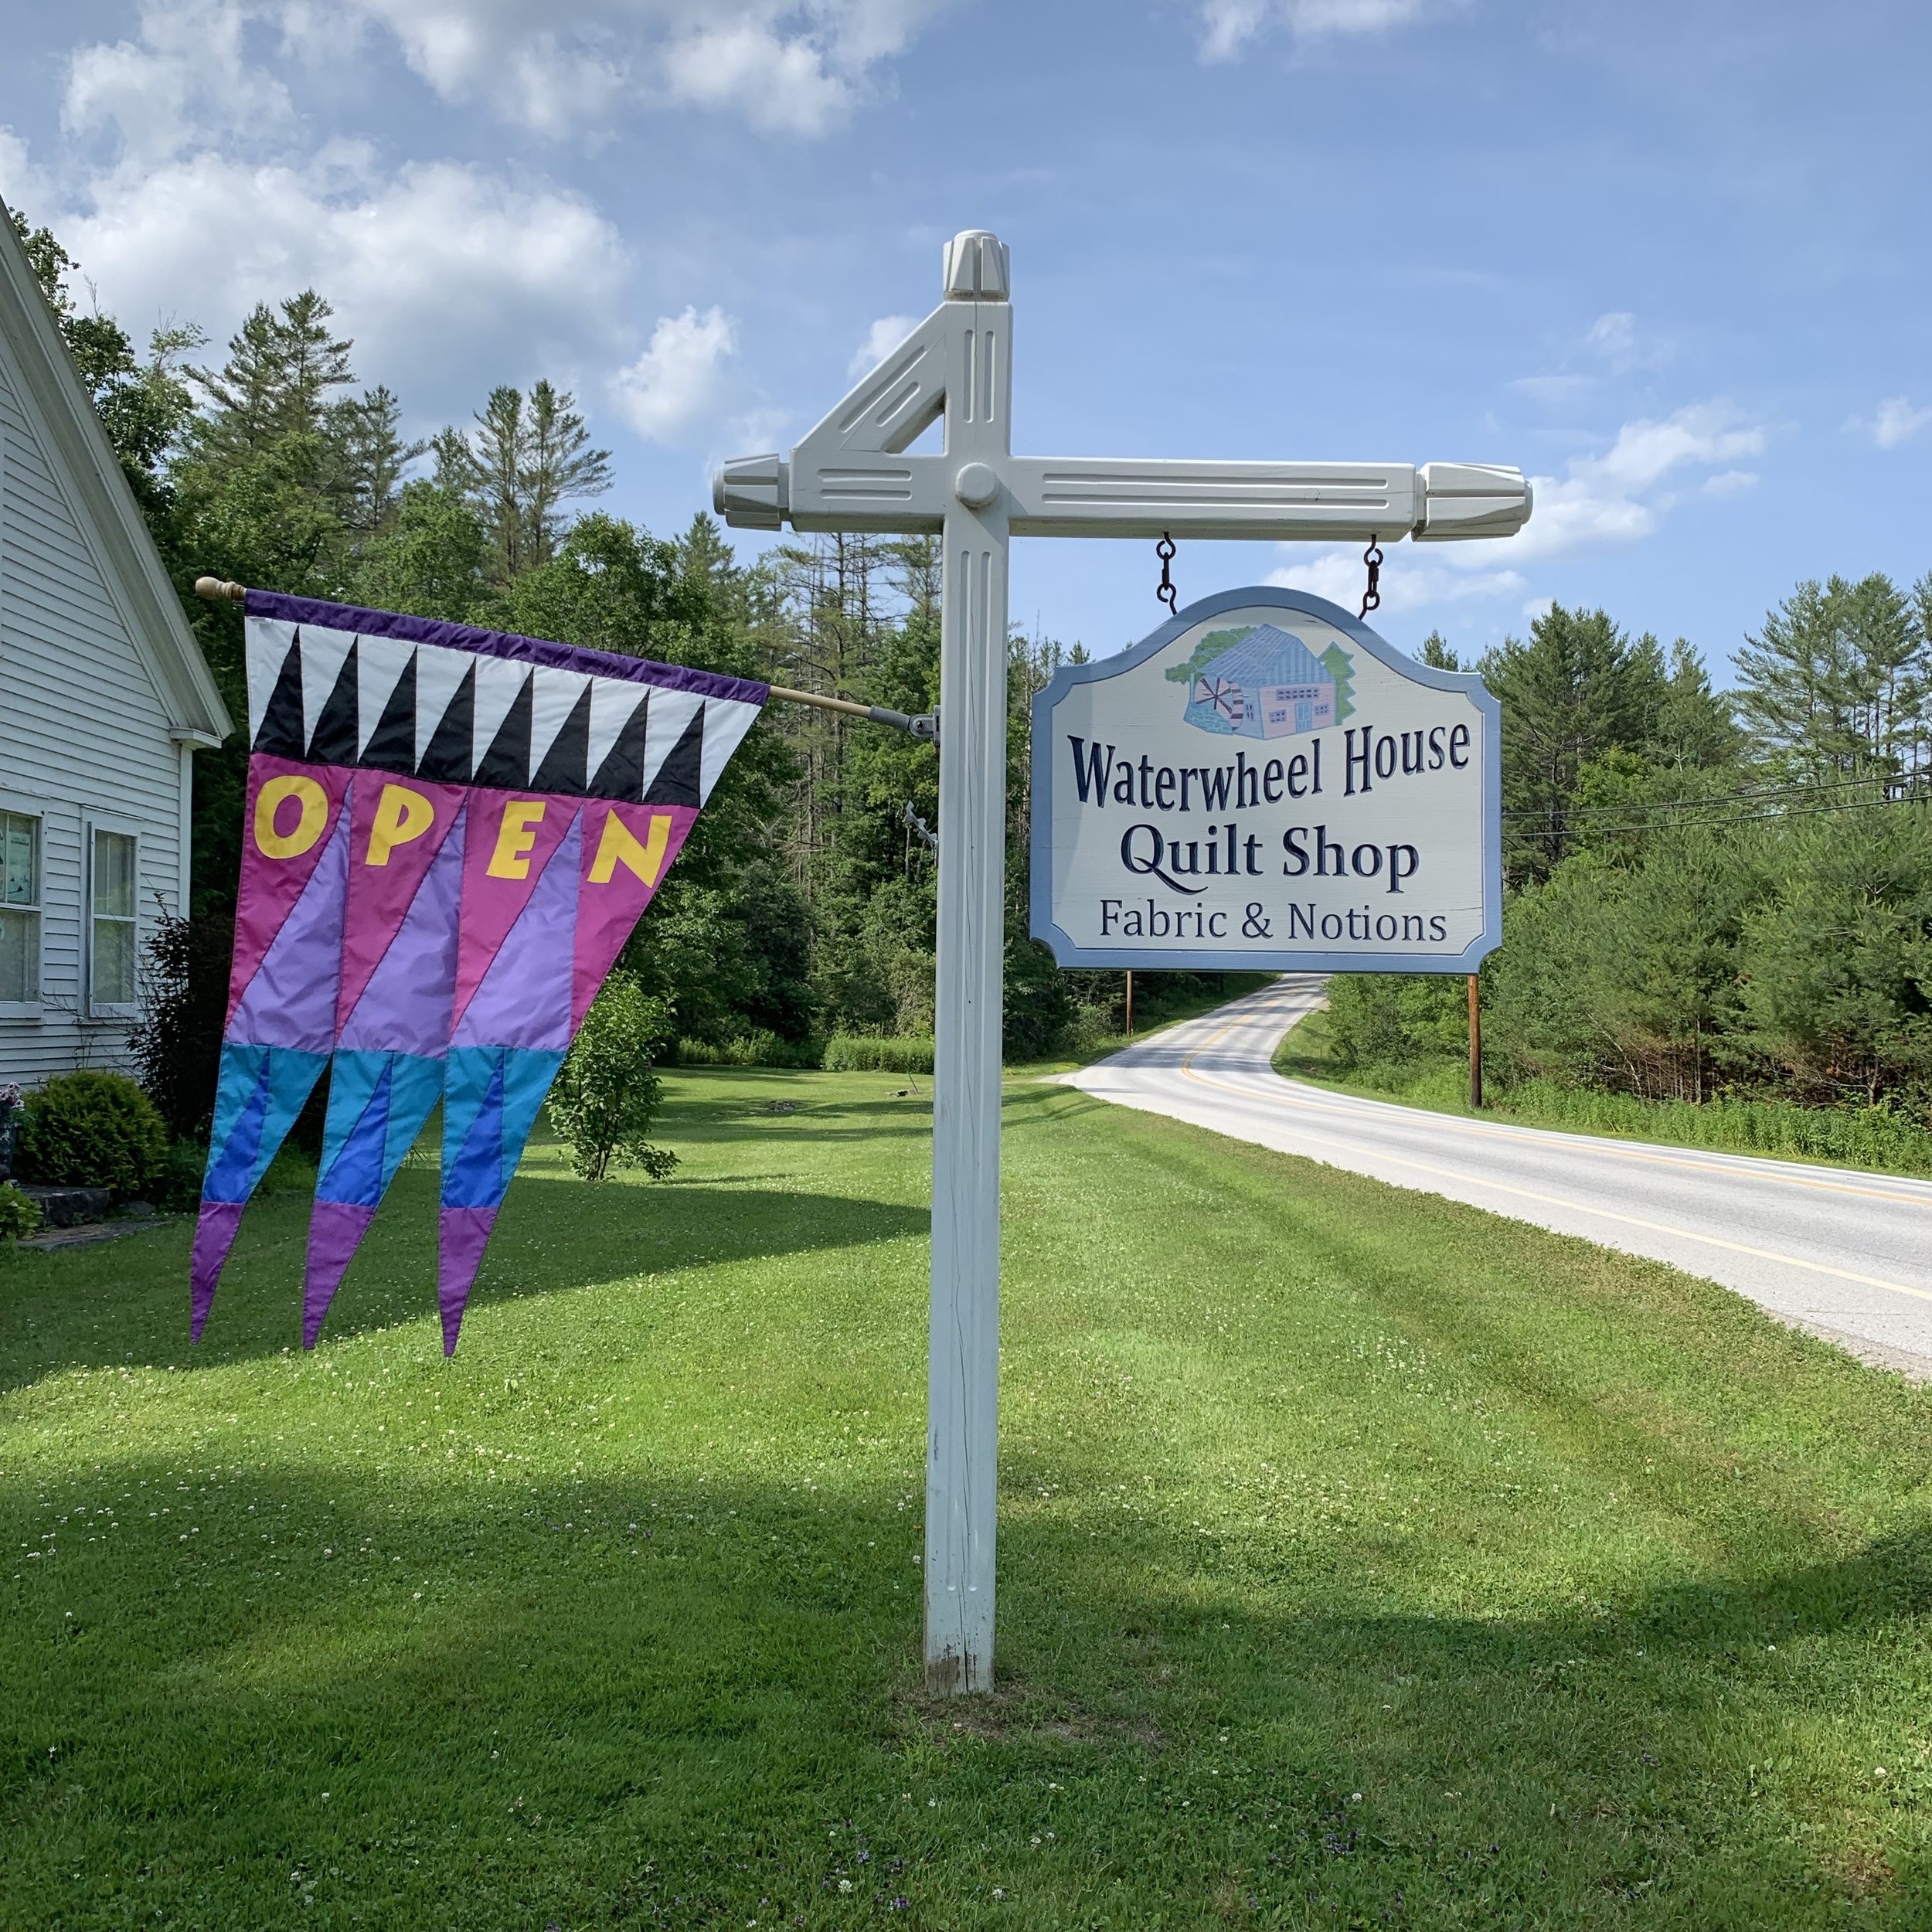 Sign in front of Waterwheel House Quilt Shop